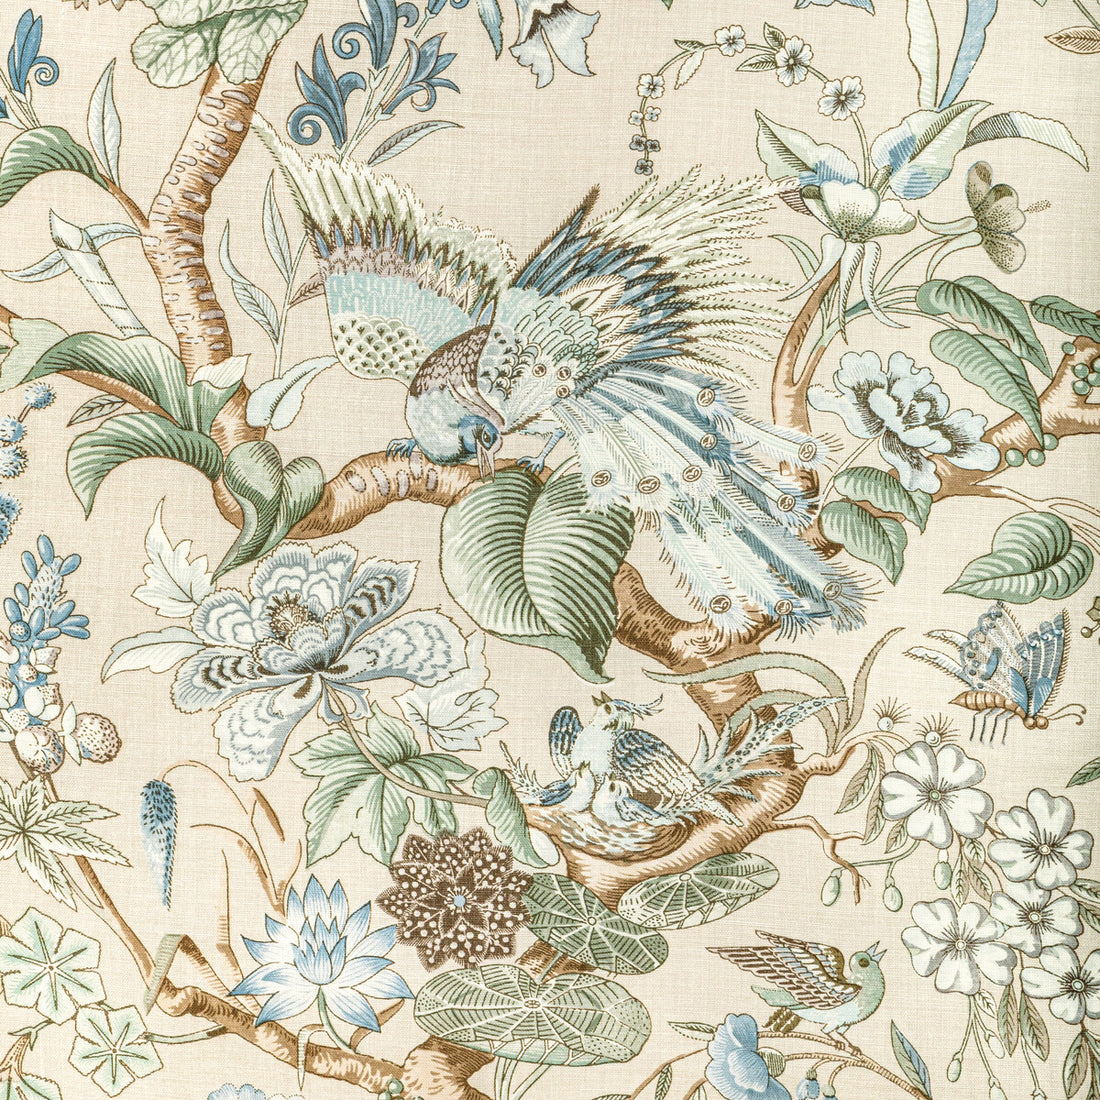 Greenfield Print fabric in sky color - pattern 2022116.153.0 - by Lee Jofa in the Bunny Williams Arcadia collection